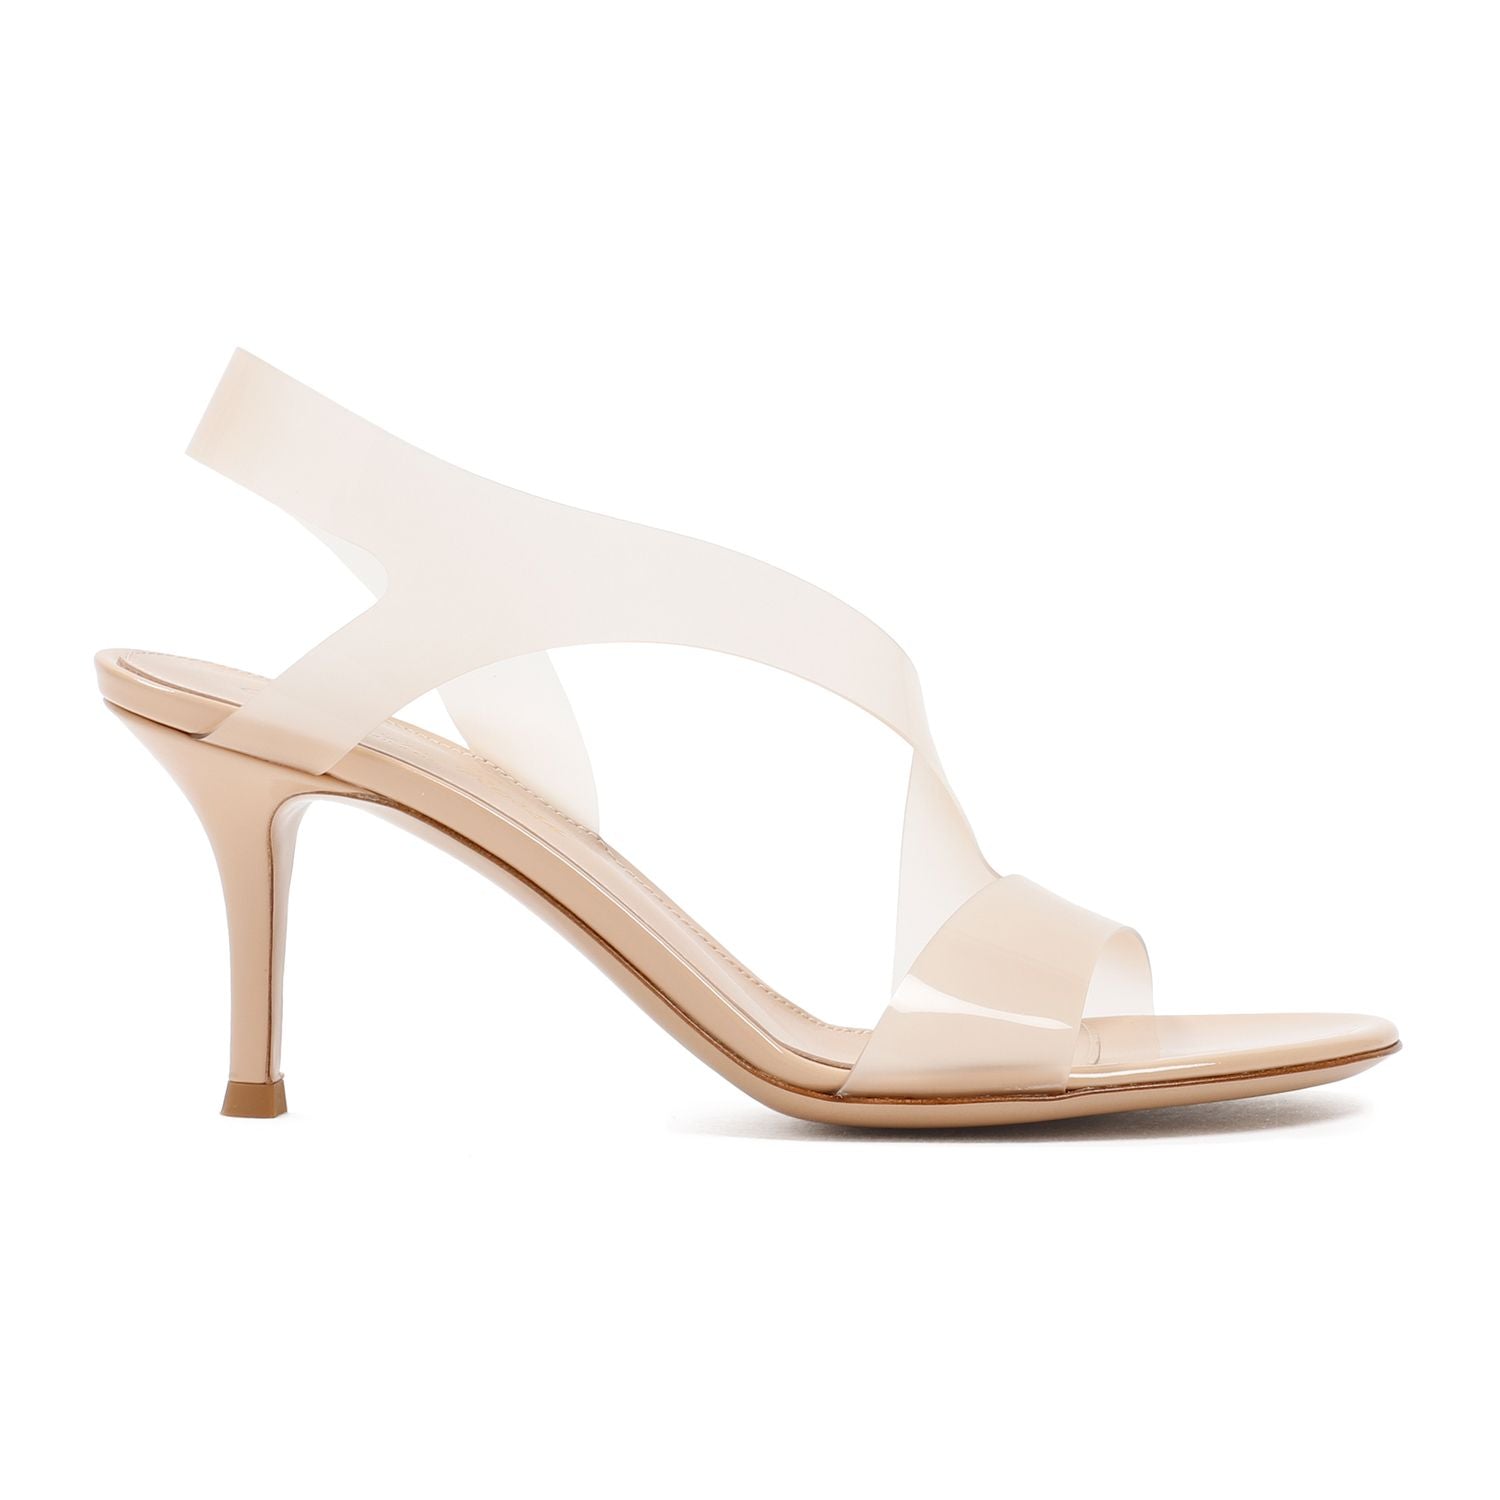 GIANVITO ROSSI NUDE & NEUTRALS PVC LEATHER SANDALS FOR WOMEN WITH 7CM HEEL